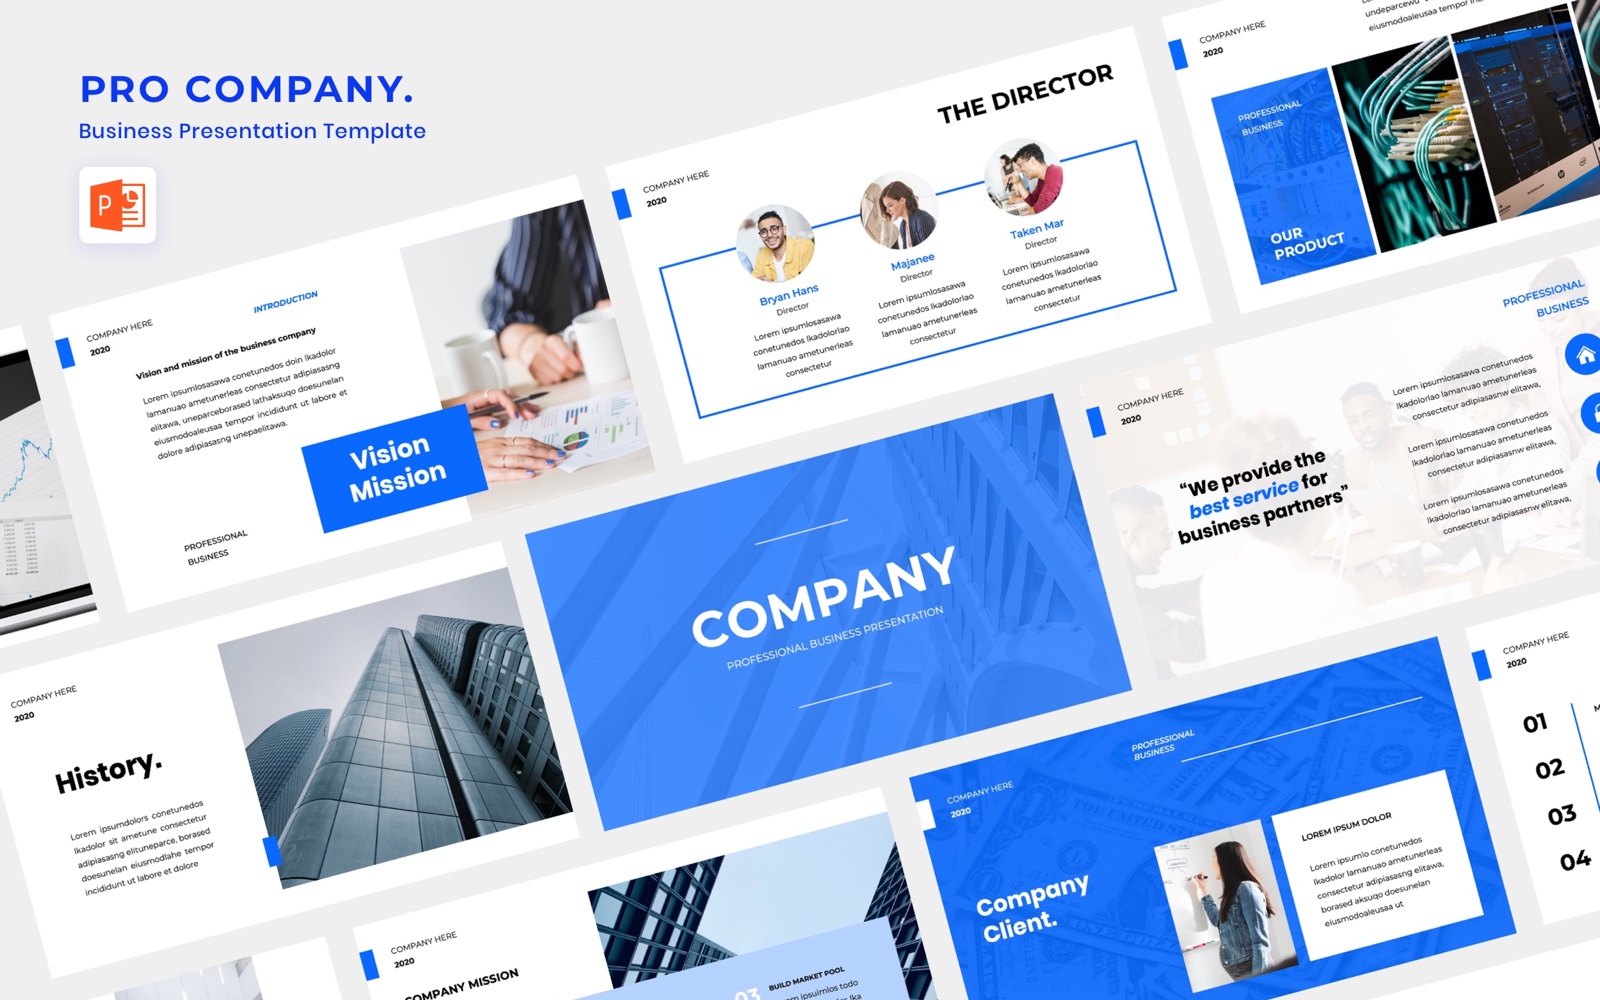 PRO COMPANY - Business PowerPoint template